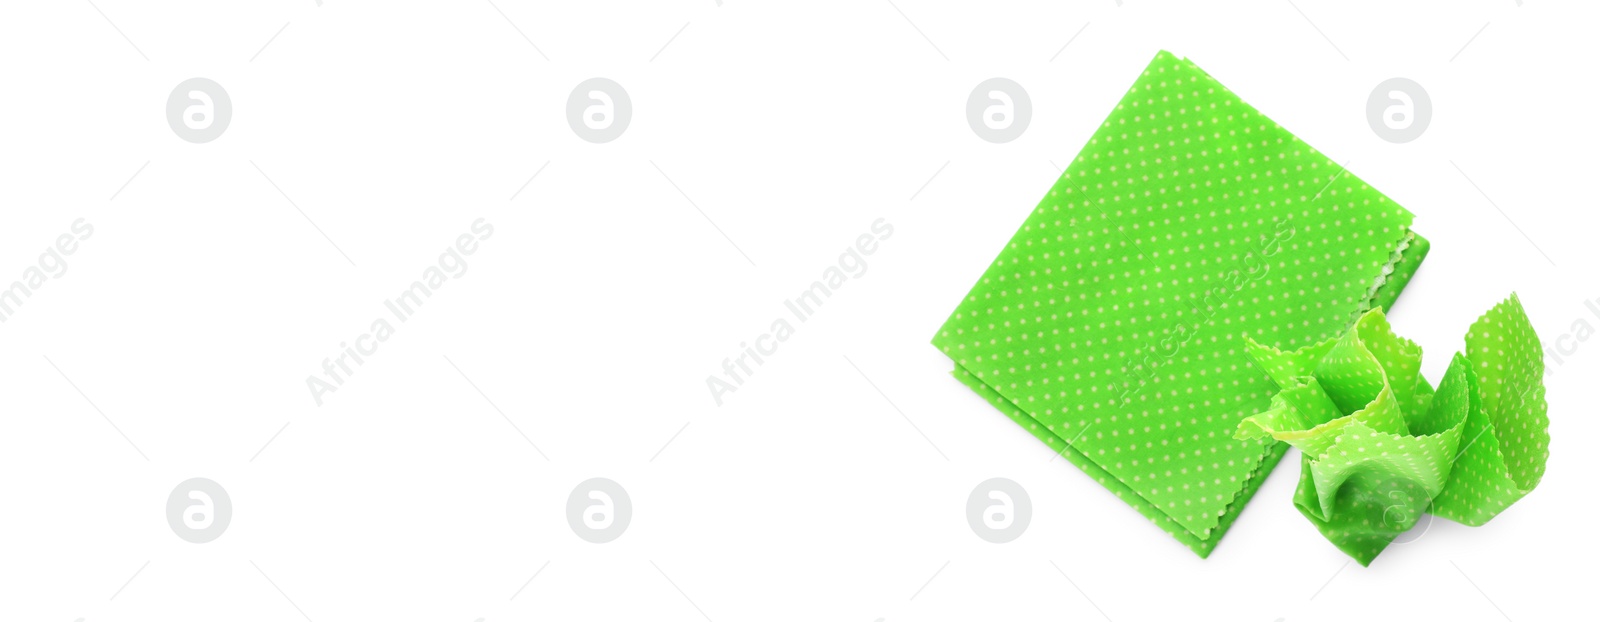 Image of Green beeswax food wraps on white background, top view. Banner design